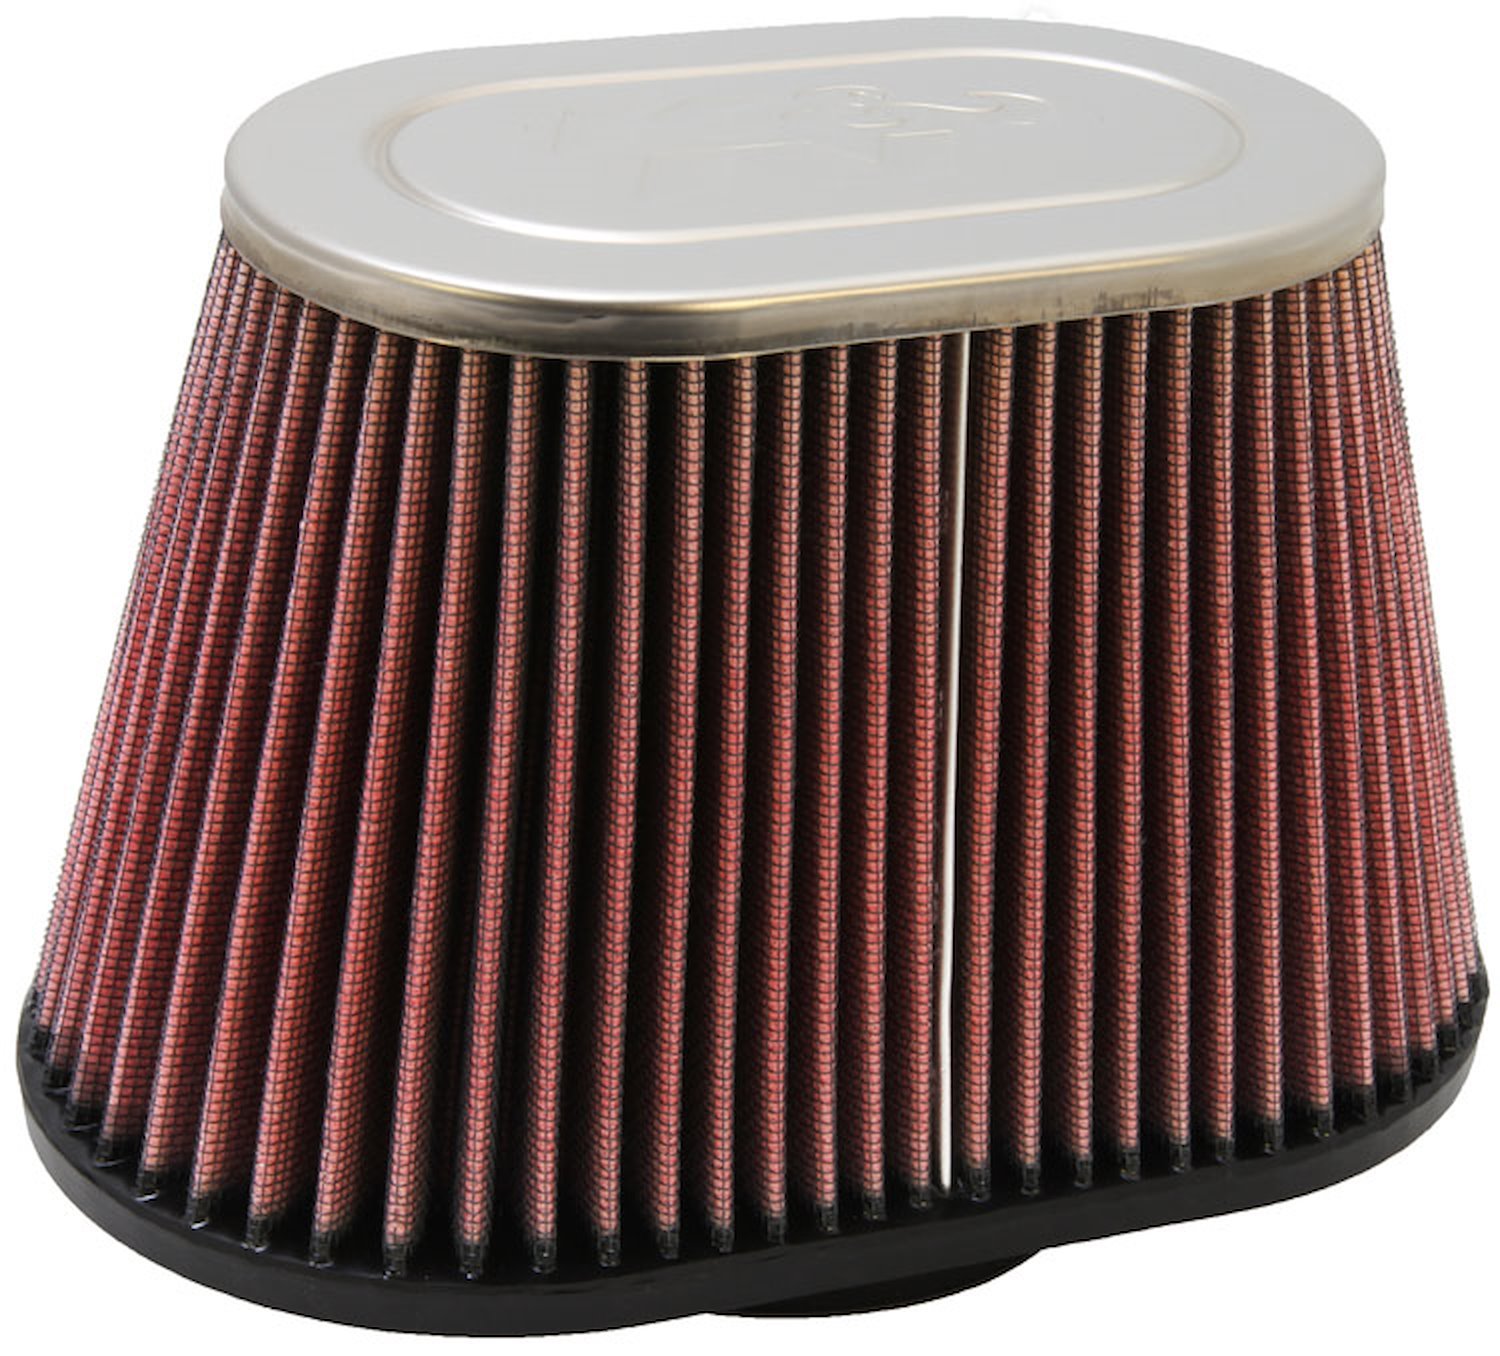 Oval Tapered Univ Clamp-On Air Filter Flange Dia - 3.500 in. (89 mm), Chrome Top